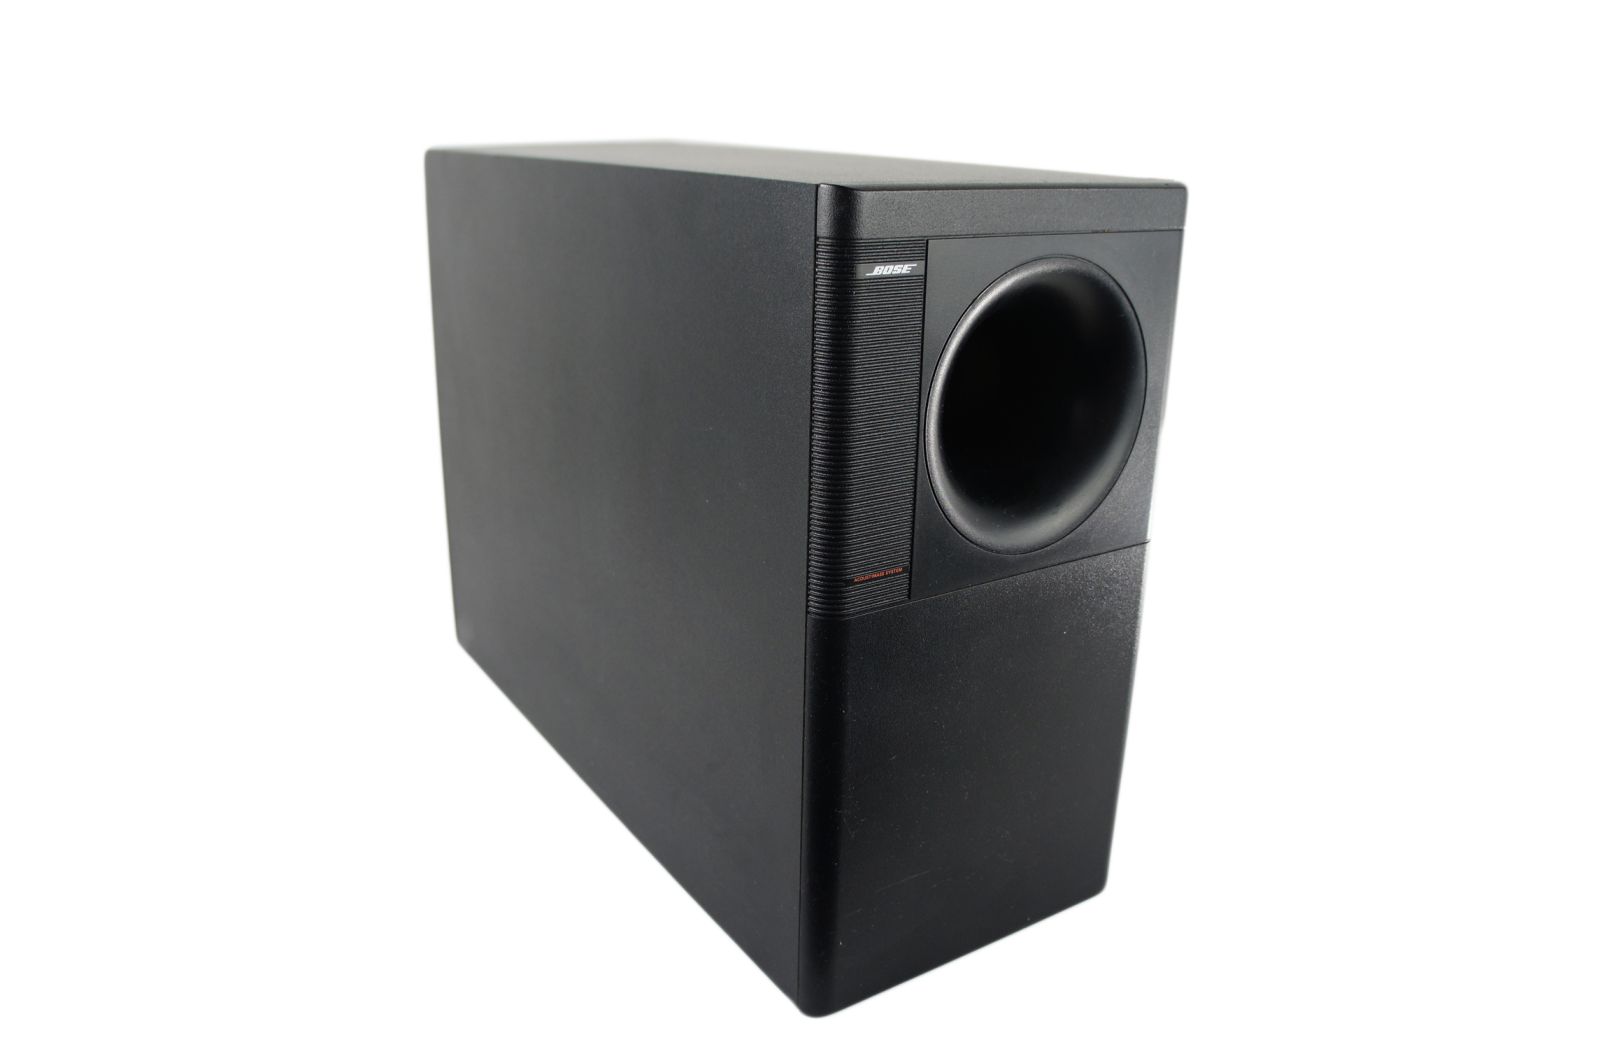 Bose_Acoustimass_5_series_III_Powered_Subwoofer